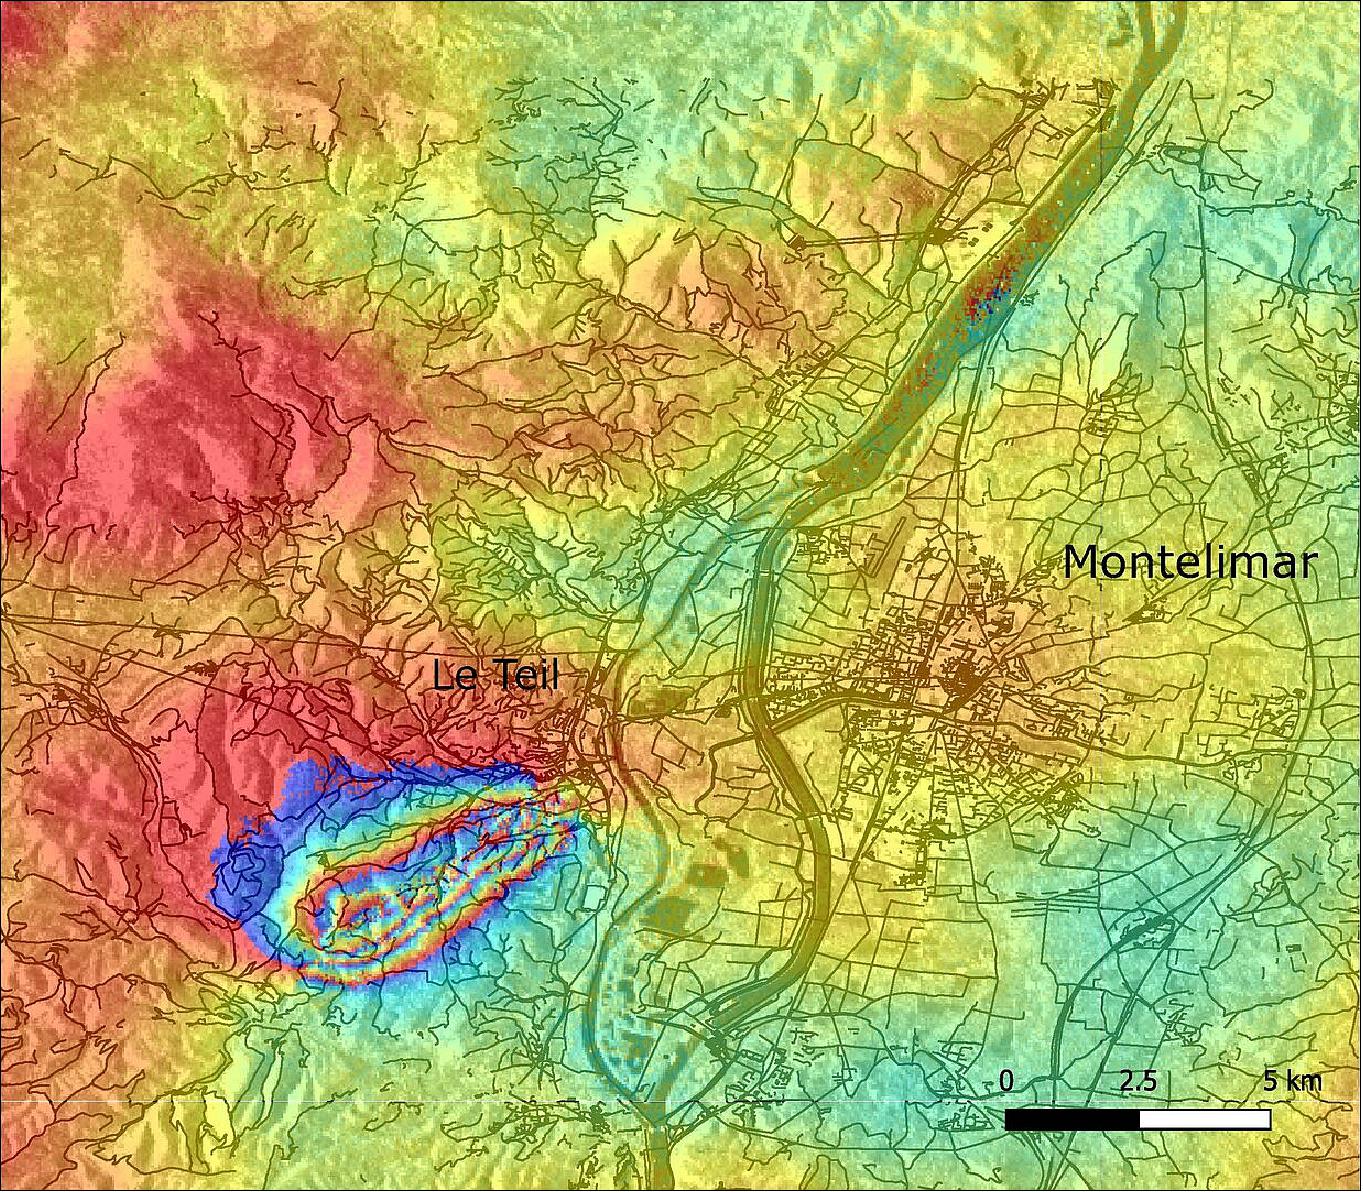 Figure 3: On 11 November 2019, the southeast of France was hit by a magnitude 5 earthquake with tremors felt between Lyon and Montélimar. The interferogram here shows a series of fringes in the area west of the city of Le Teil and has allowed scientists to identify the fault at the origin of the earthquake. The fringes are characteristic of ground motion. This product is derived from the Copernicus Sentinel-1 mission using the acquisitions of 6 and 12 November 2019. The interferogram was generated on GEP with the Diapsaon processing chain from CNES/TRE Altamira (image credit: ESA, the image contains modified Copernicus Sentinel data (2019), processed by ESA)